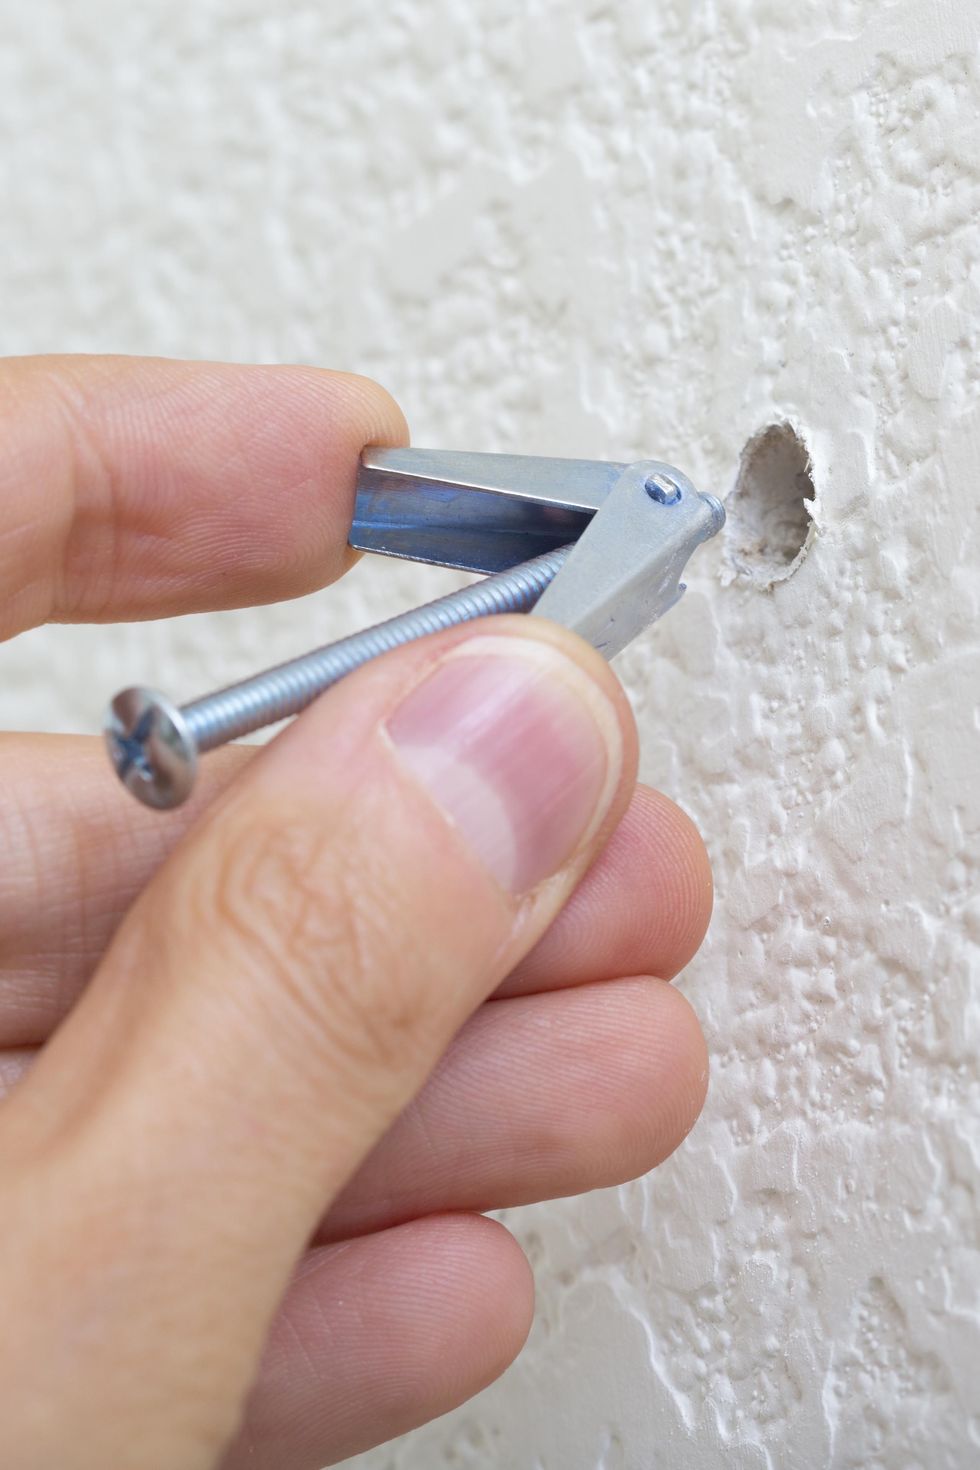 No-Tool Drywall Picture Hook - Reliable Fasteners